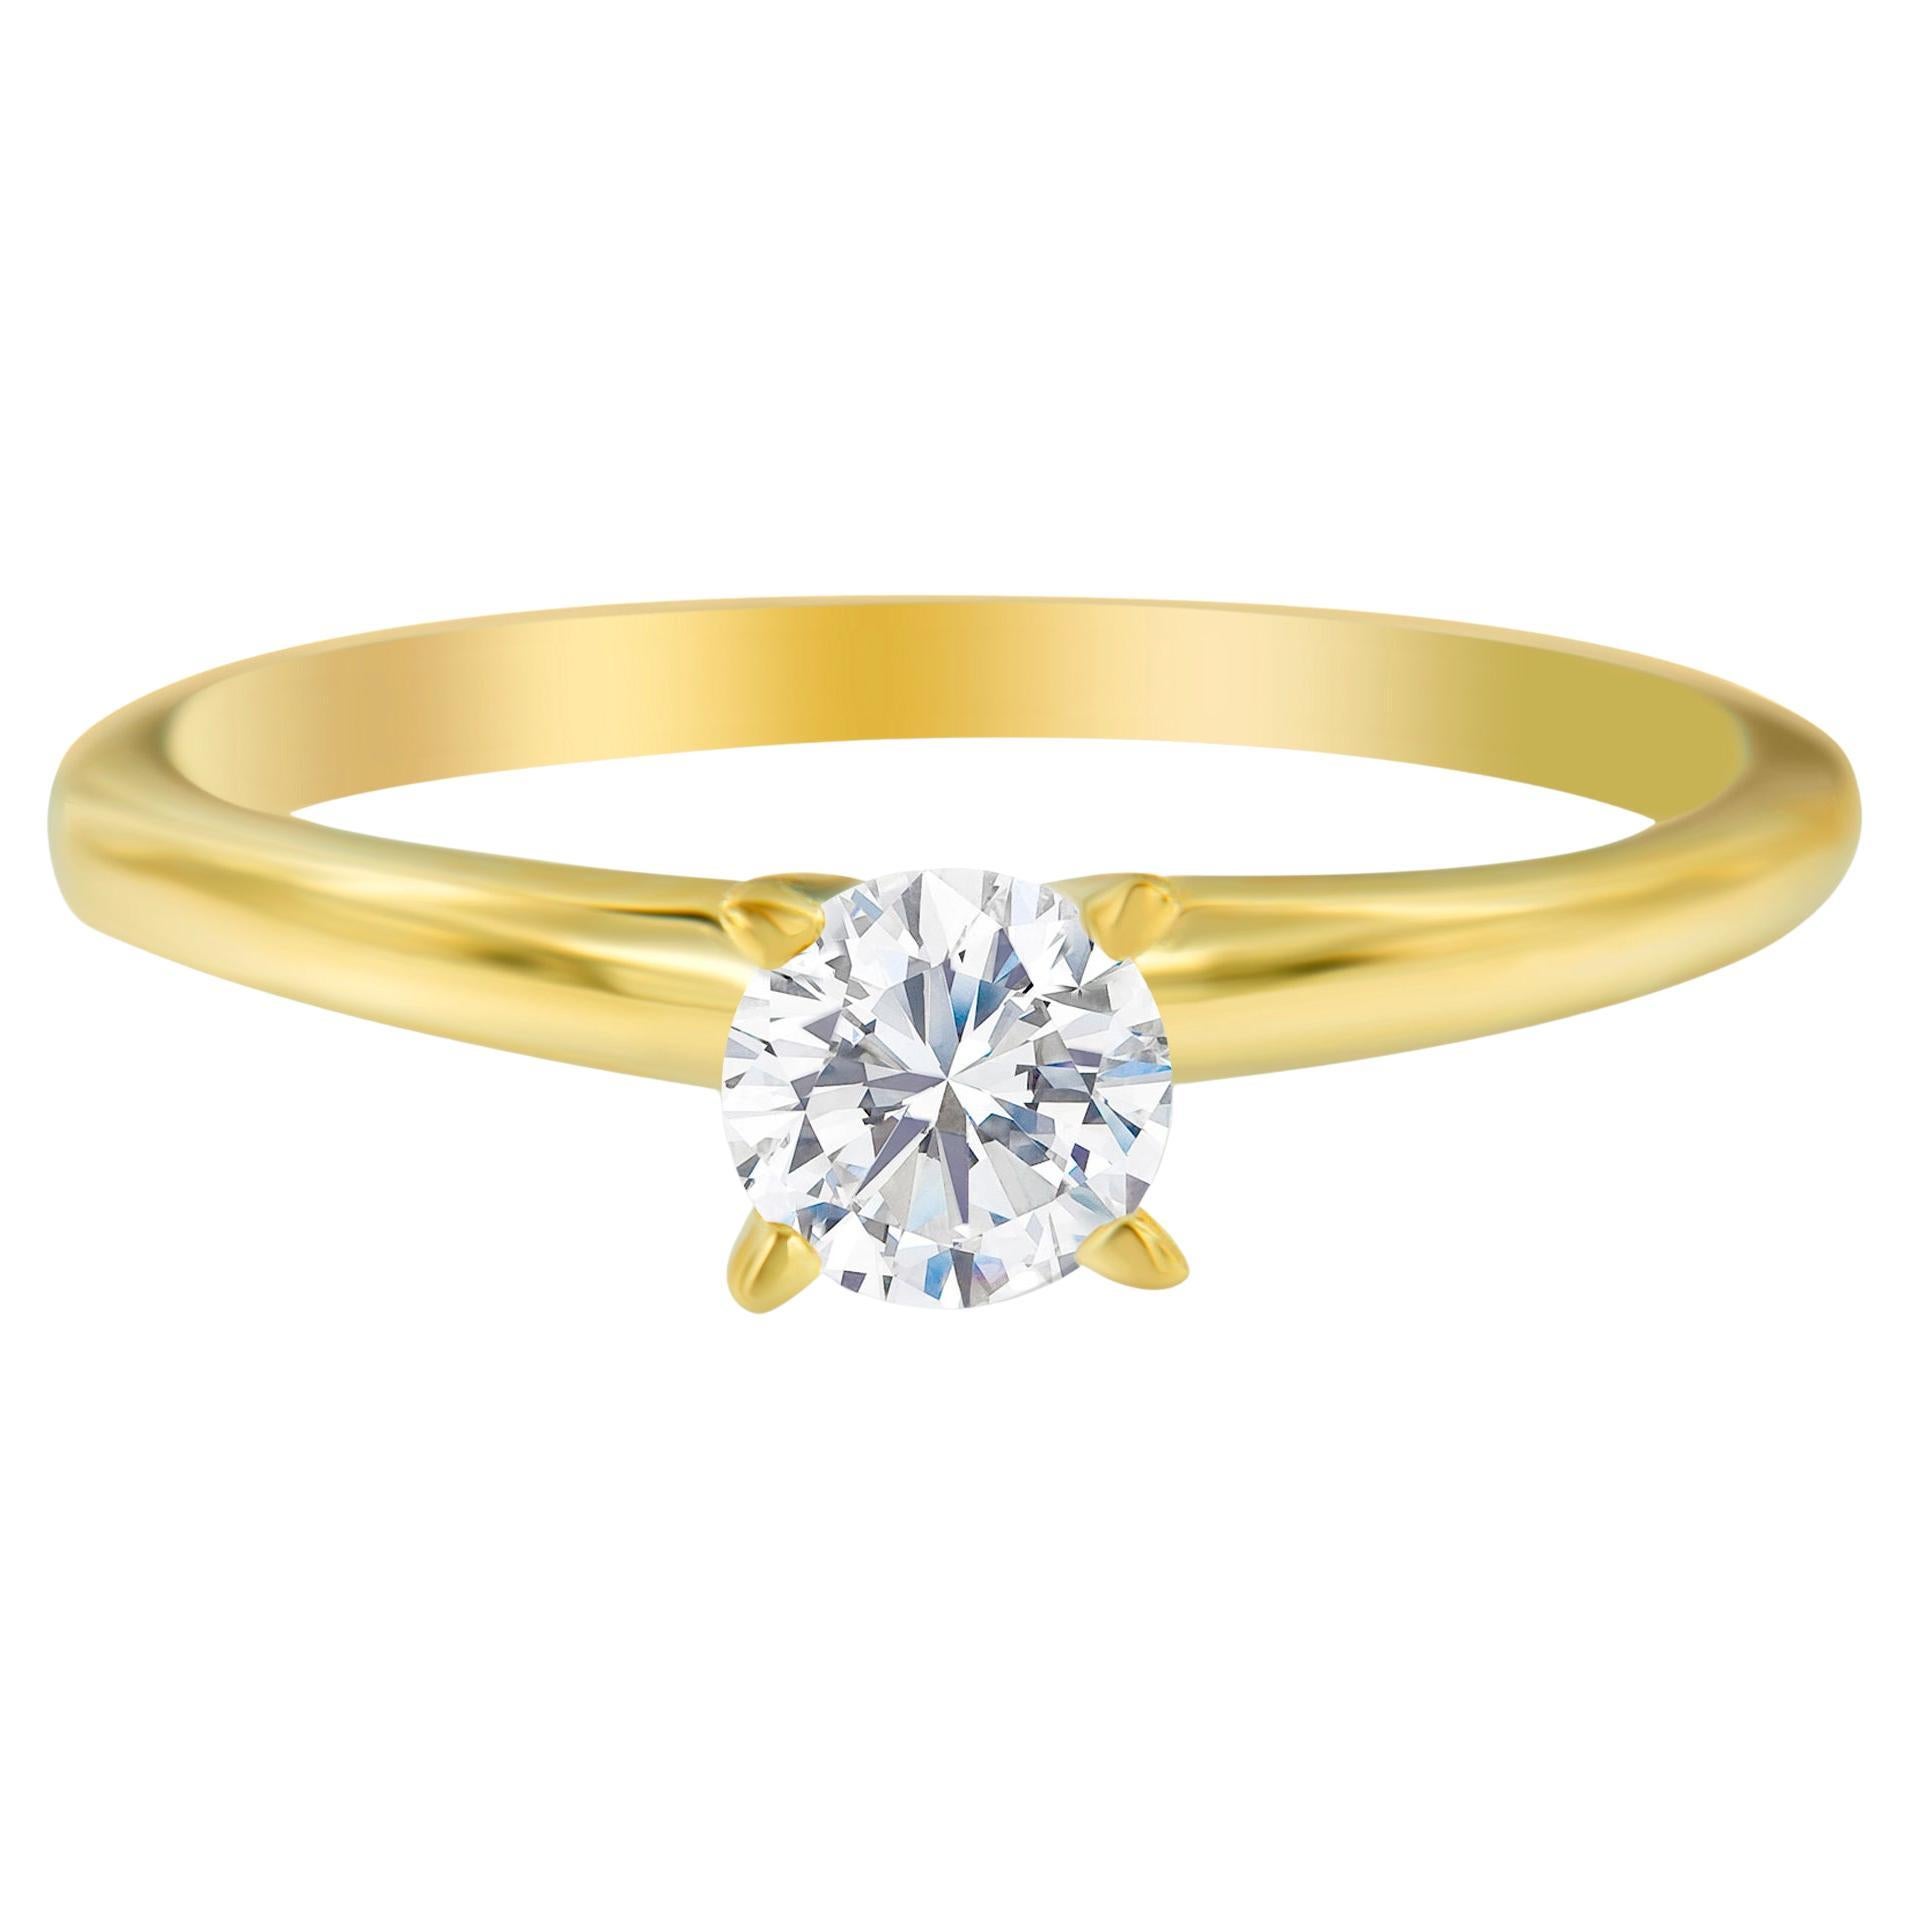 GIA Certified 14K Yellow Gold 1/2 Carat Diamond Solitaire Engagement Ring